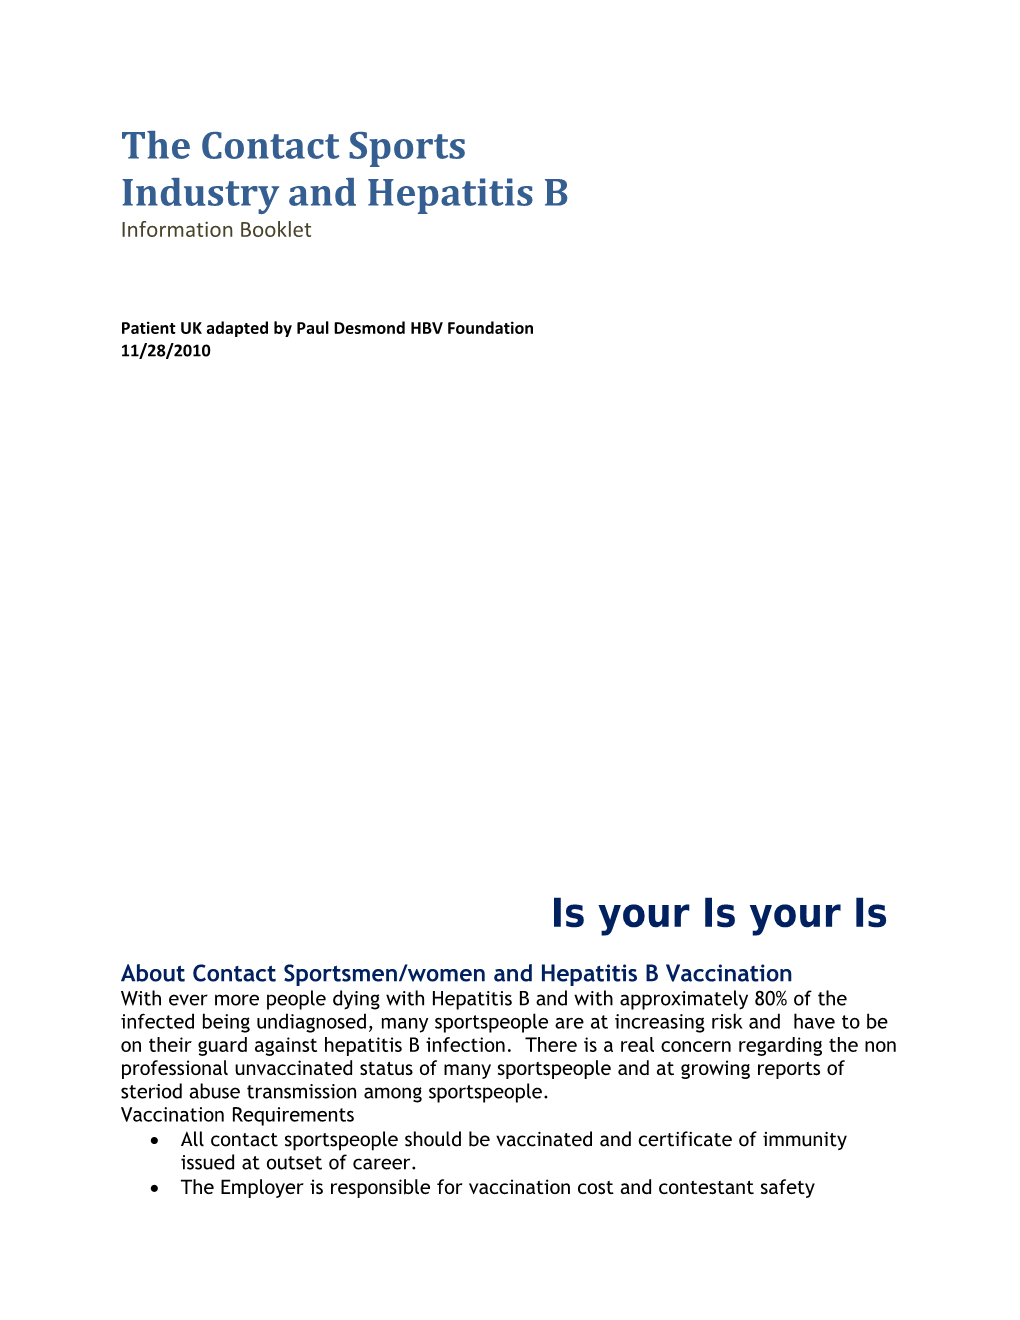 The Contact Sports Industry and Hepatitis B